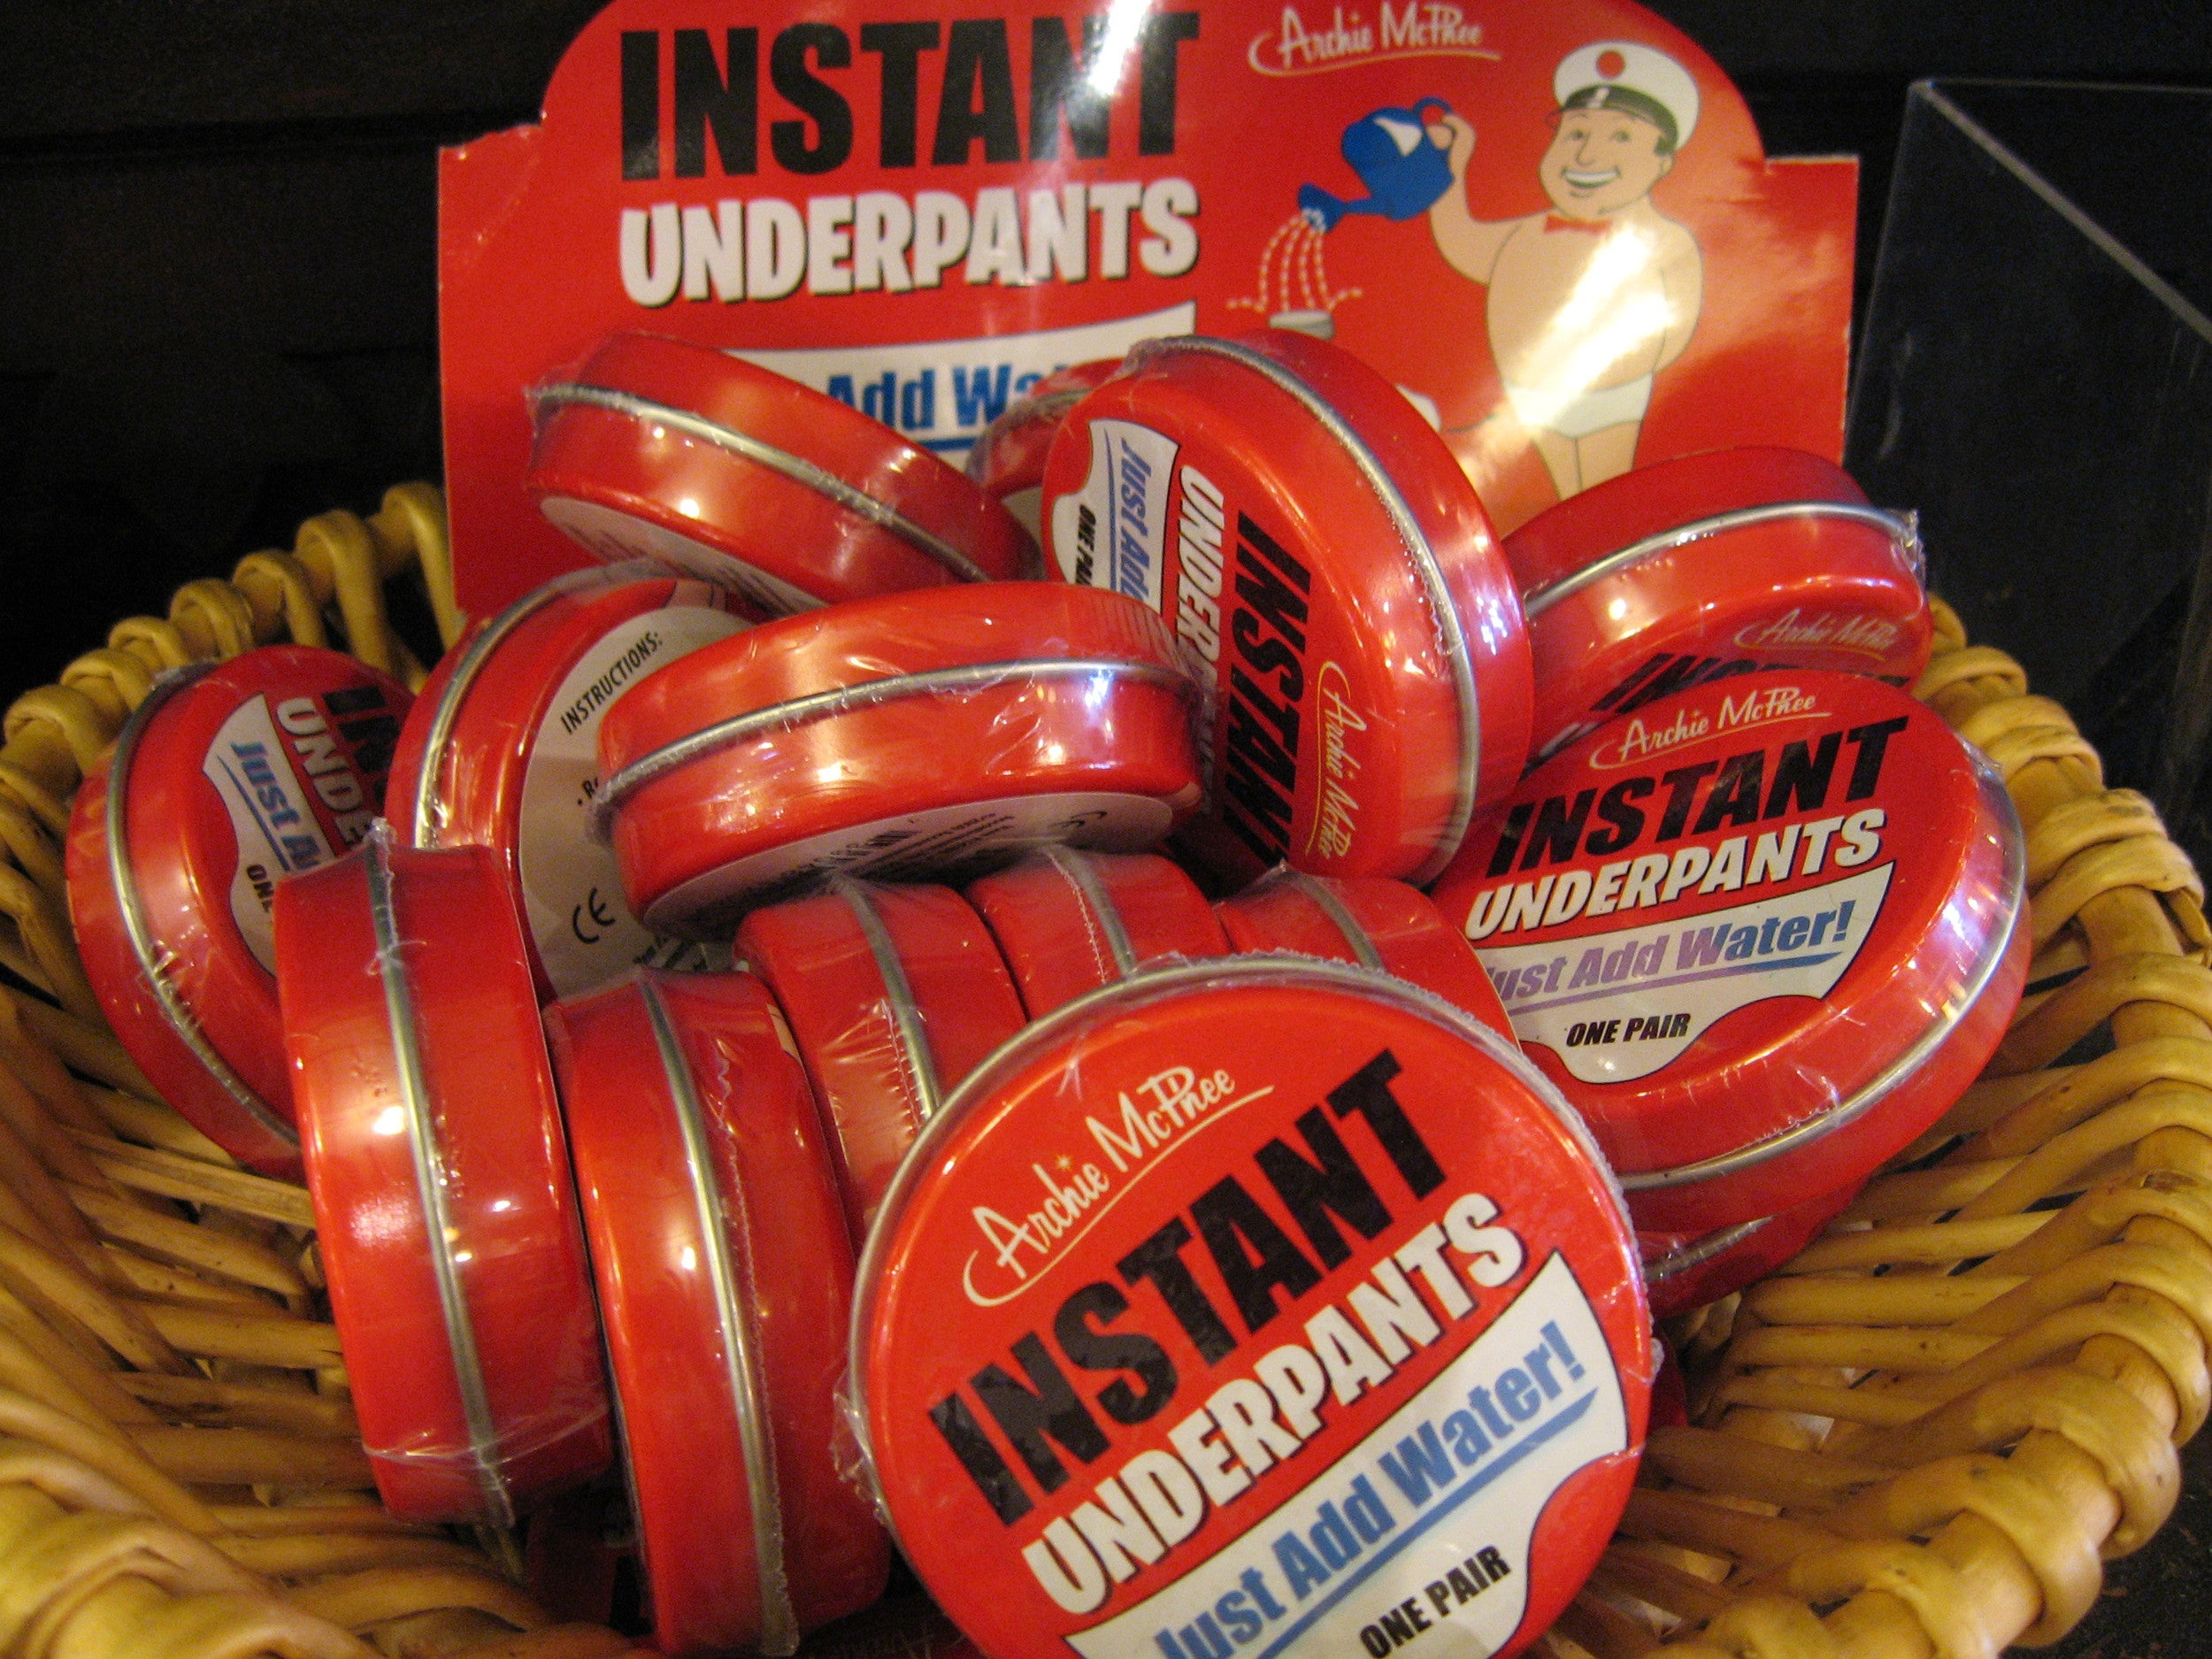 Instant Under Pants - SWAGGER Magazine